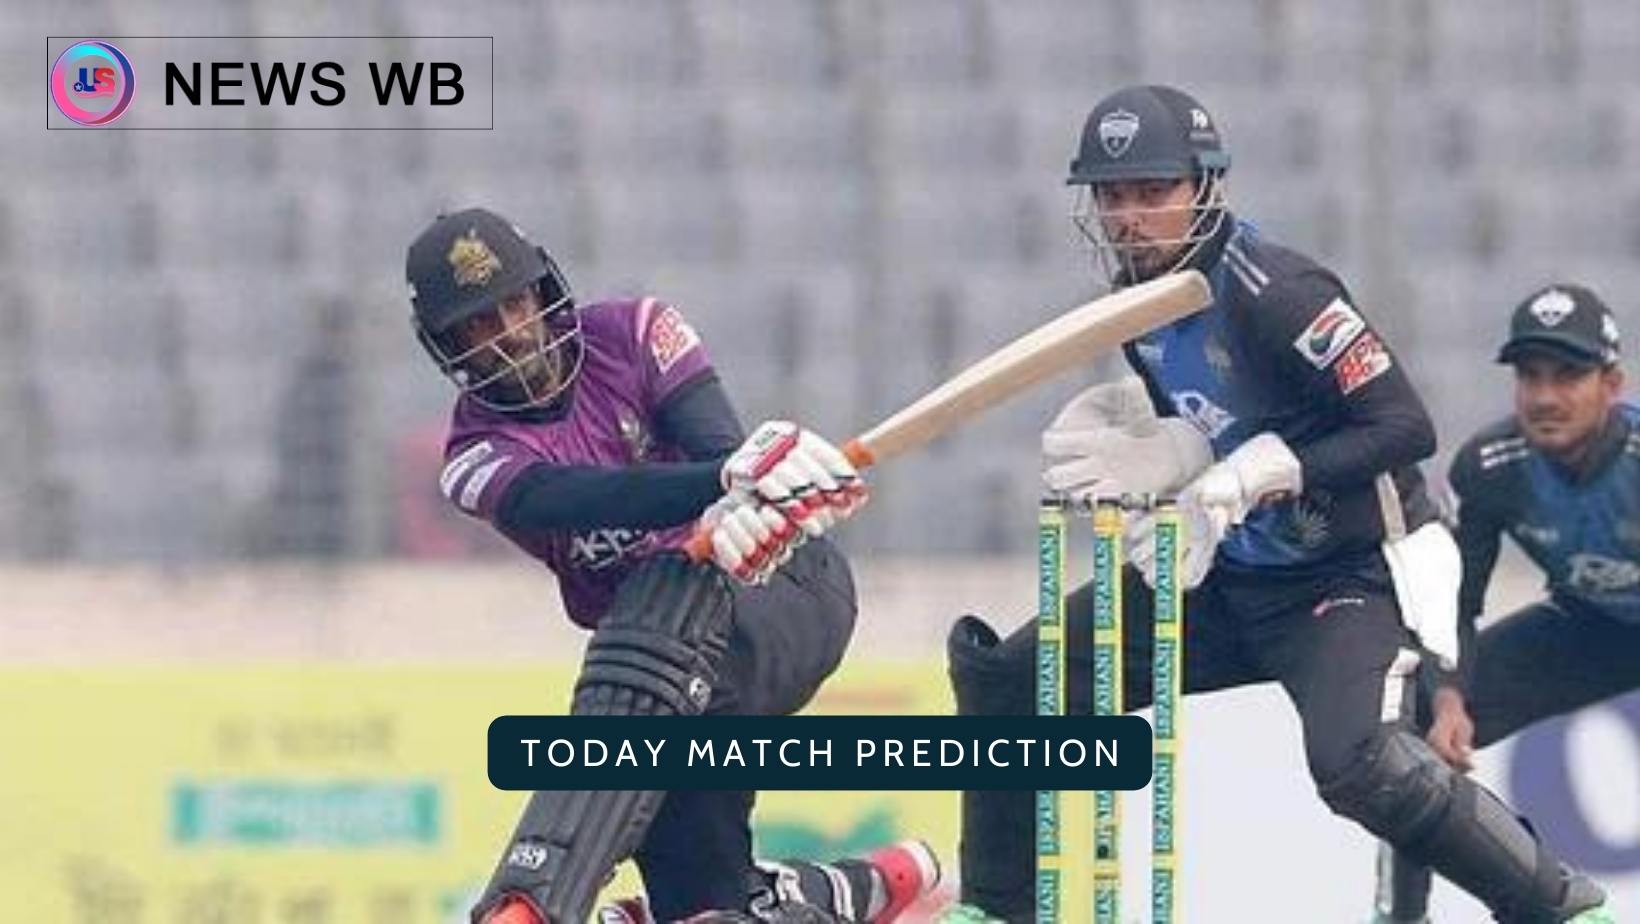 Today Match Prediction: CGC vs RGR Dream11 Team, Chattogram Challengers vs Rangpur Riders 27th Match, Who Will Win?